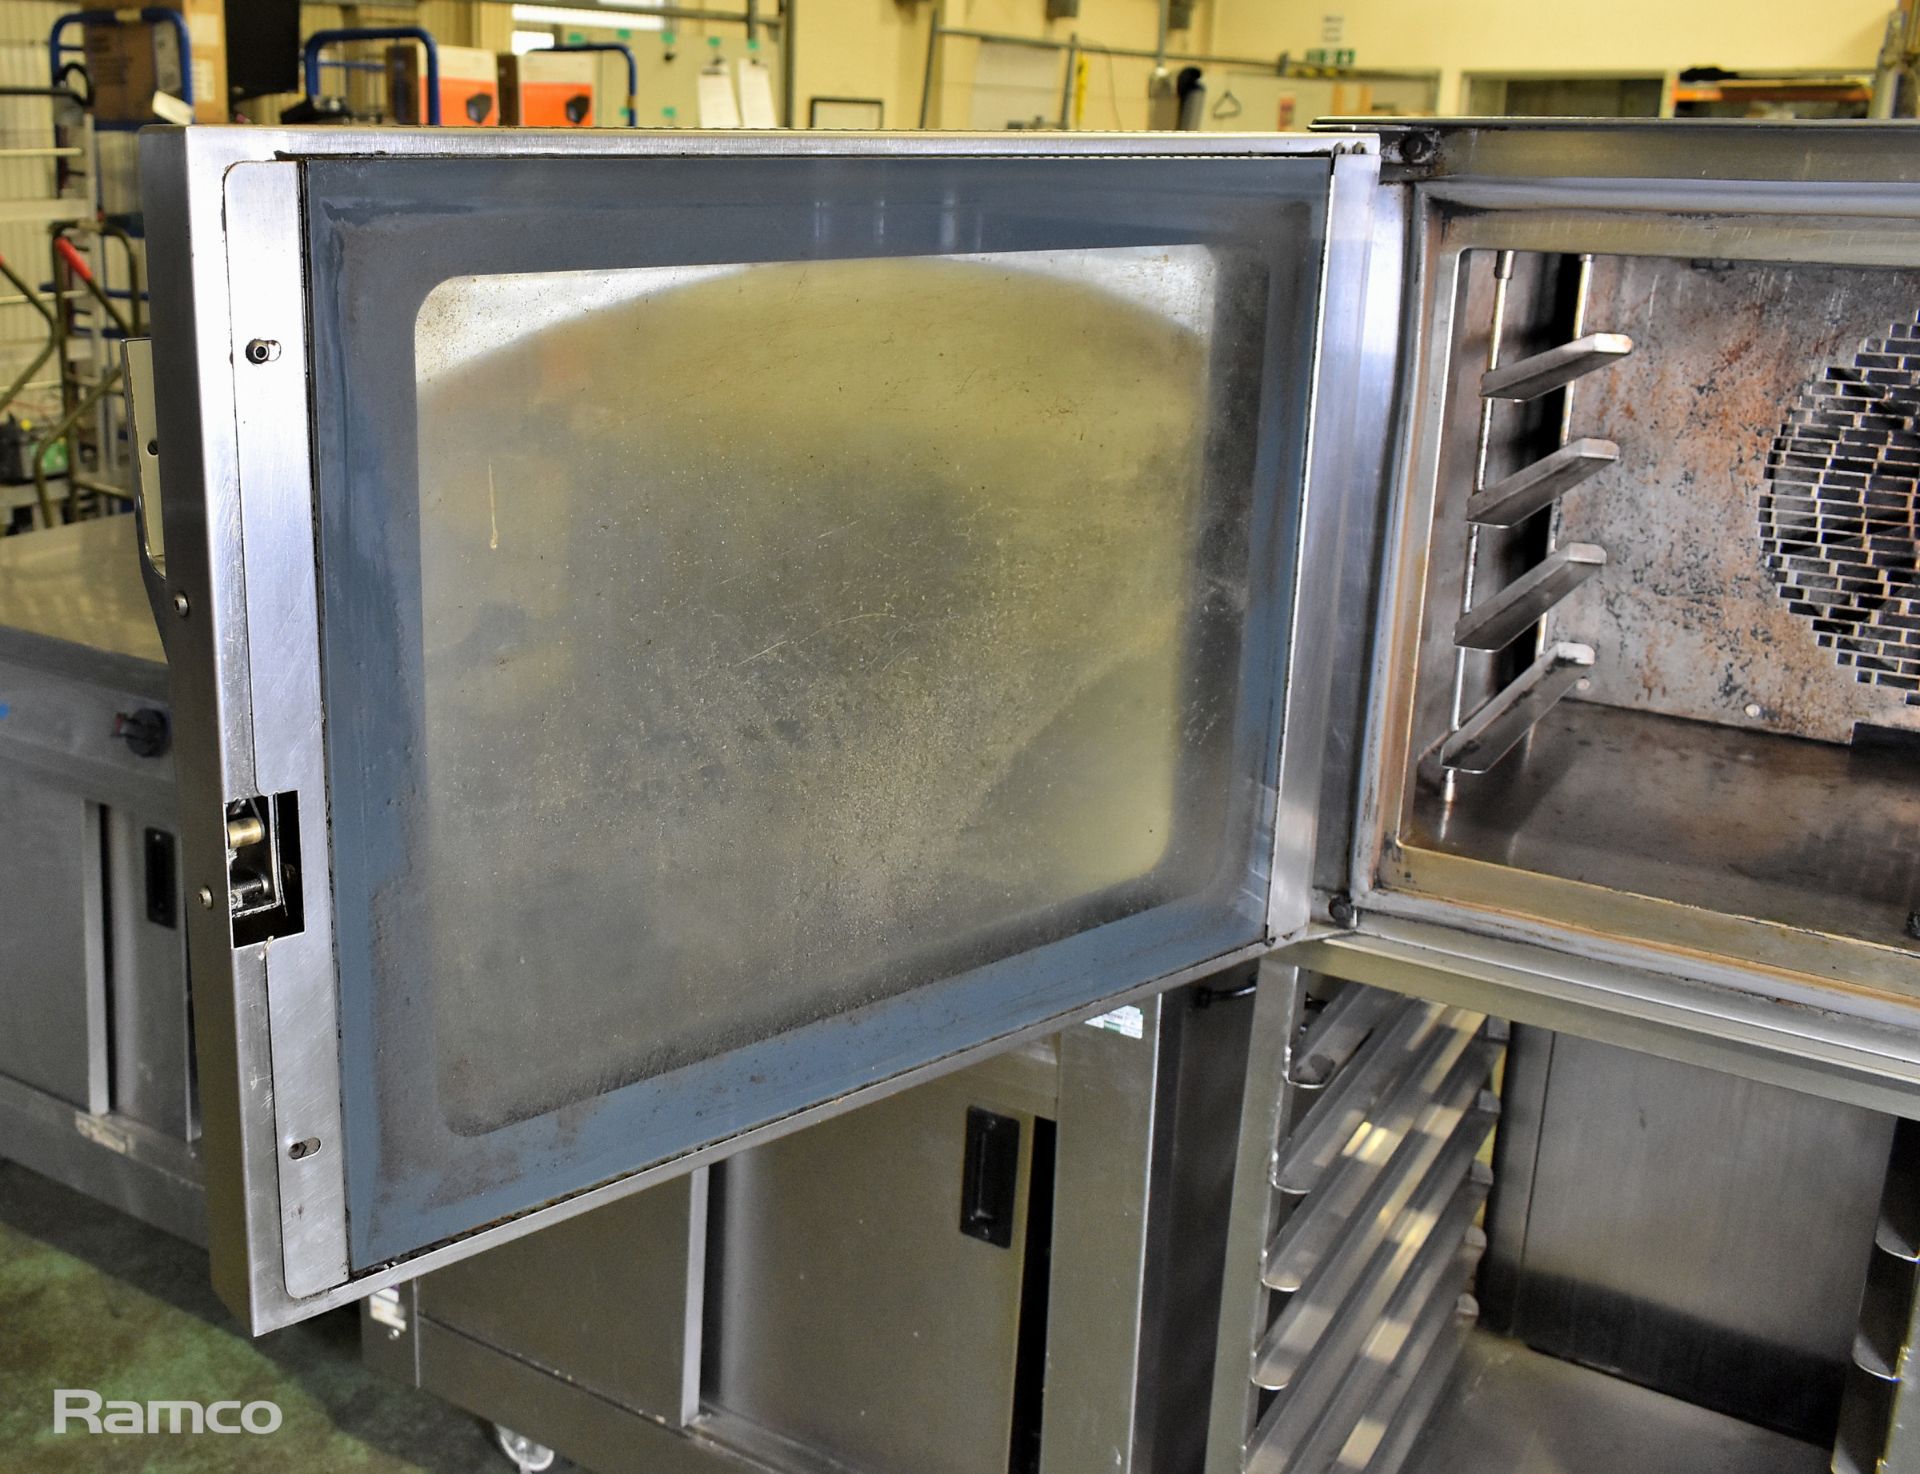 Mono BX equipment FG 15B Oven with stand, 415V 50Hz - Serial No 010460360 - L100 x W87 x H150cm - Image 4 of 7